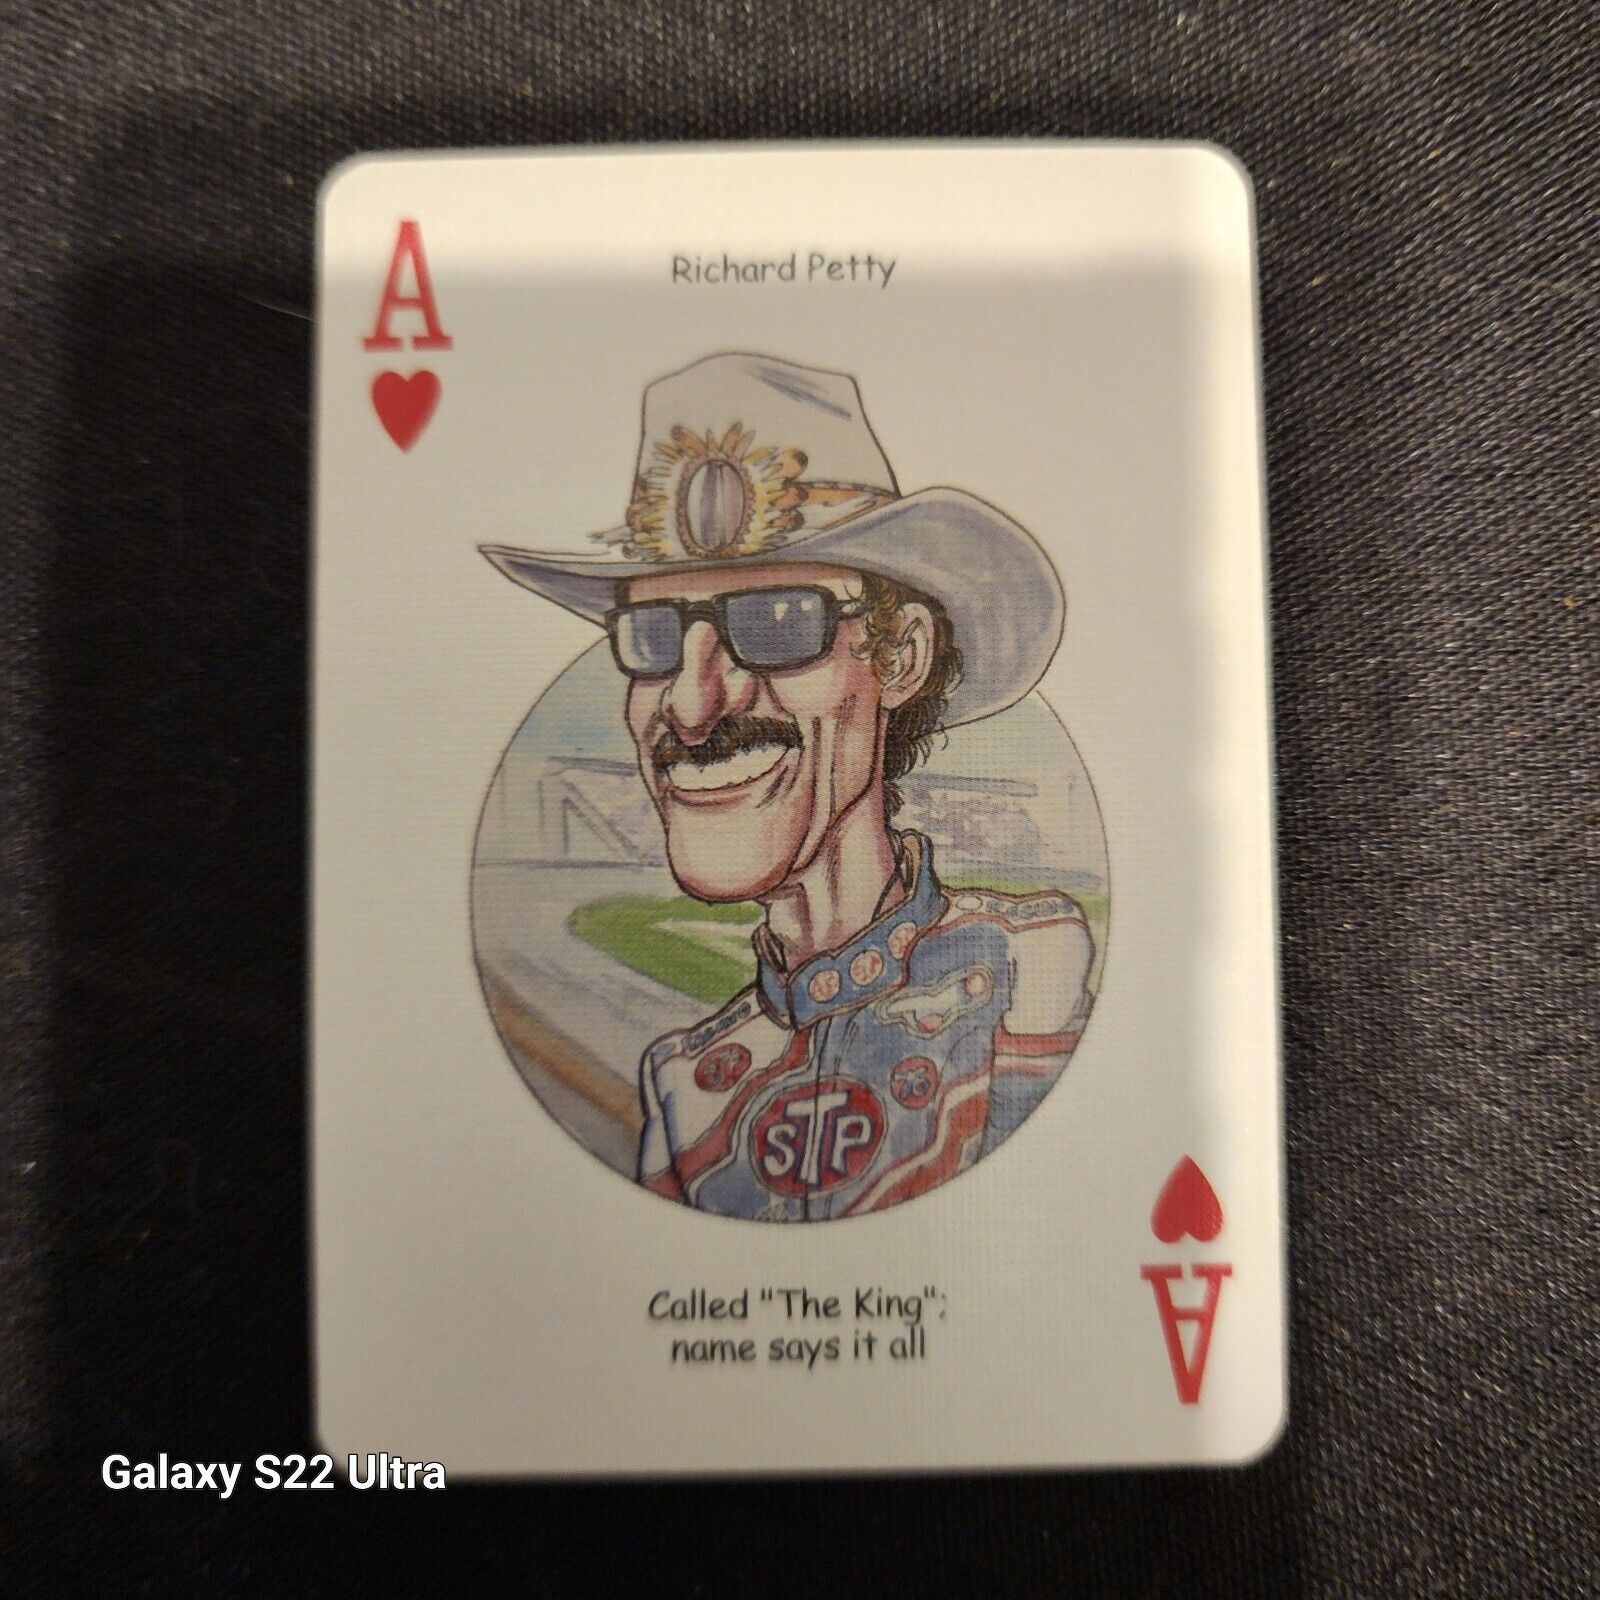 Richard Petty Ace of Hearts - The Original Auto Racing Legends Playing Card